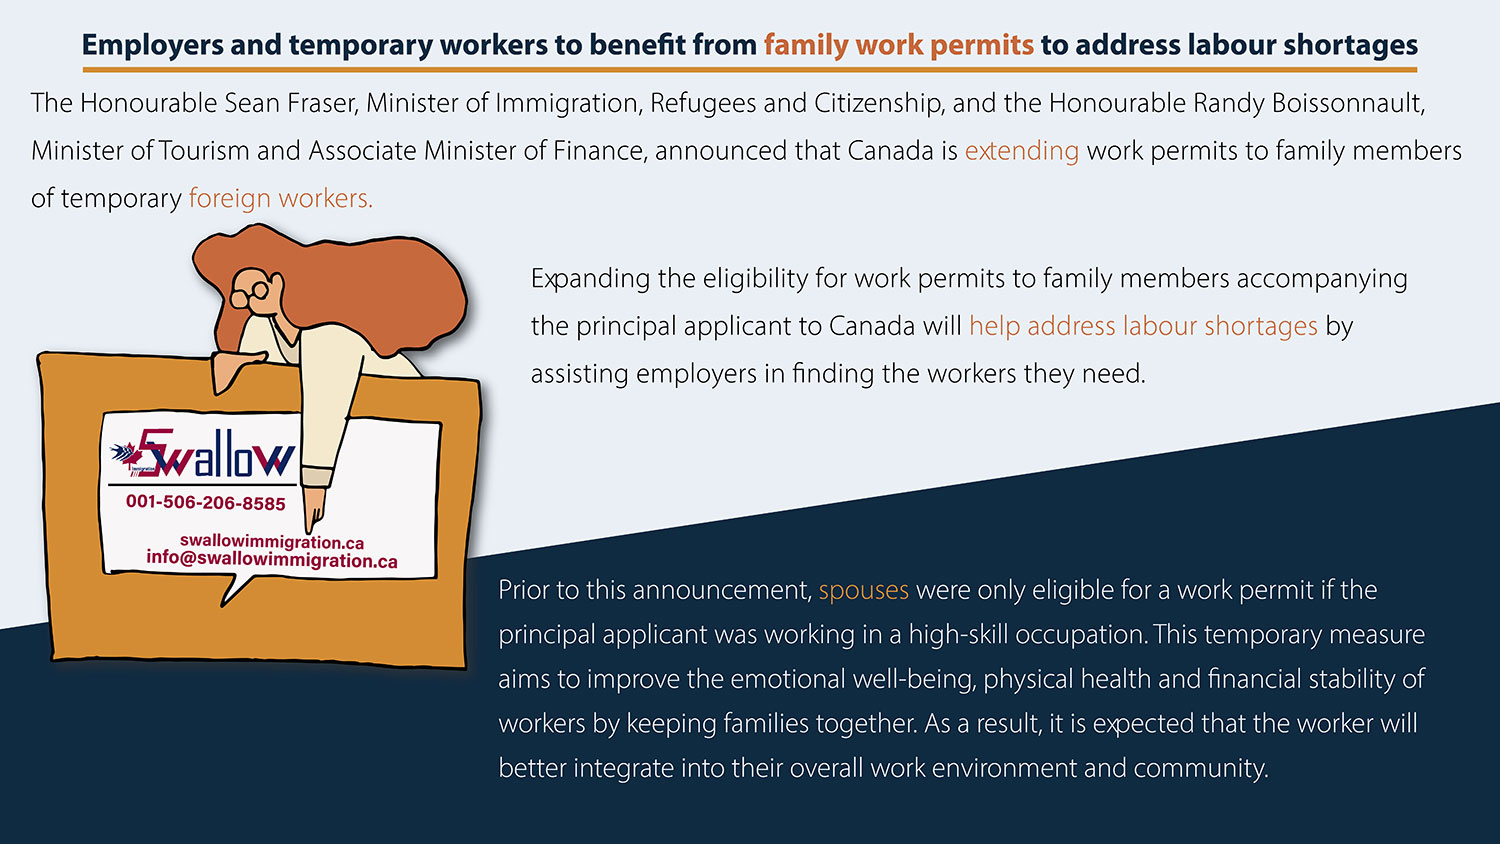 Employers and temporary workers to benefit from family work permits to address labour shortages